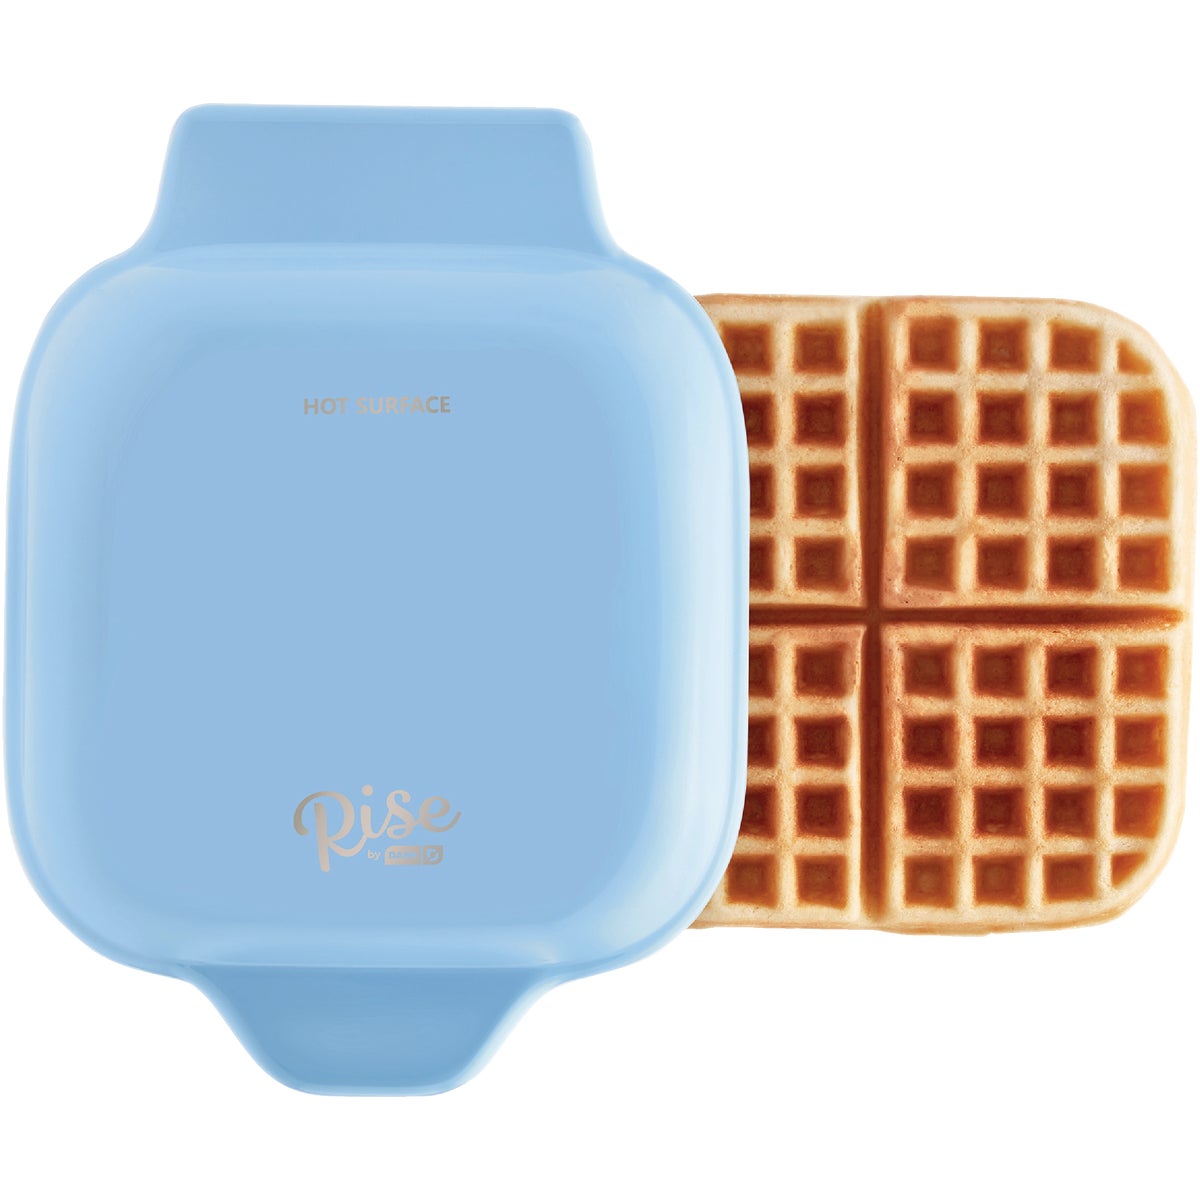 Rise By Dash 7 In. Blue Waffle Maker